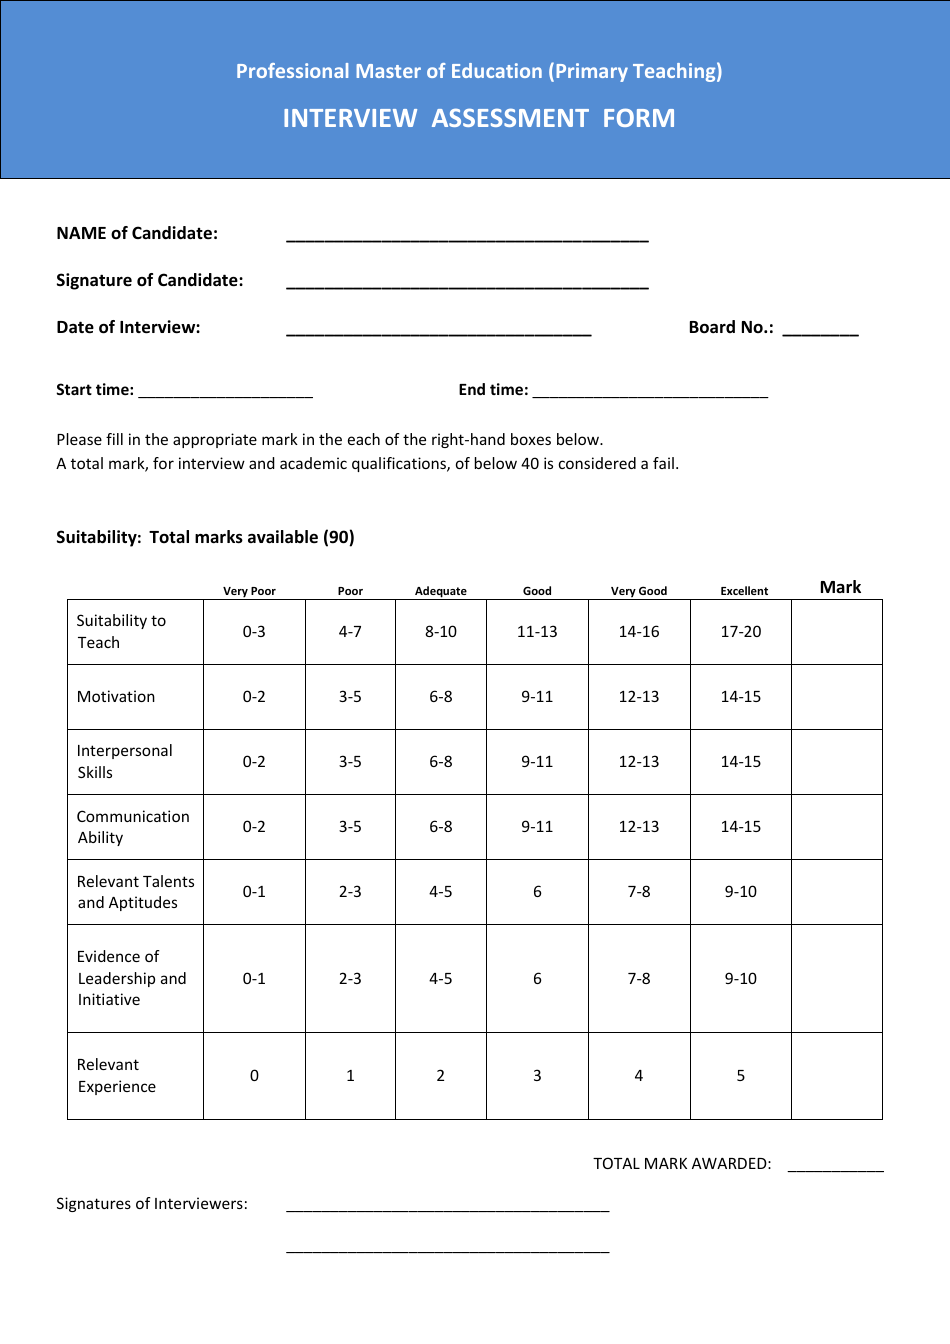 Interview Assessment Form - Professional Master of Education (Primary Teaching), Page 1